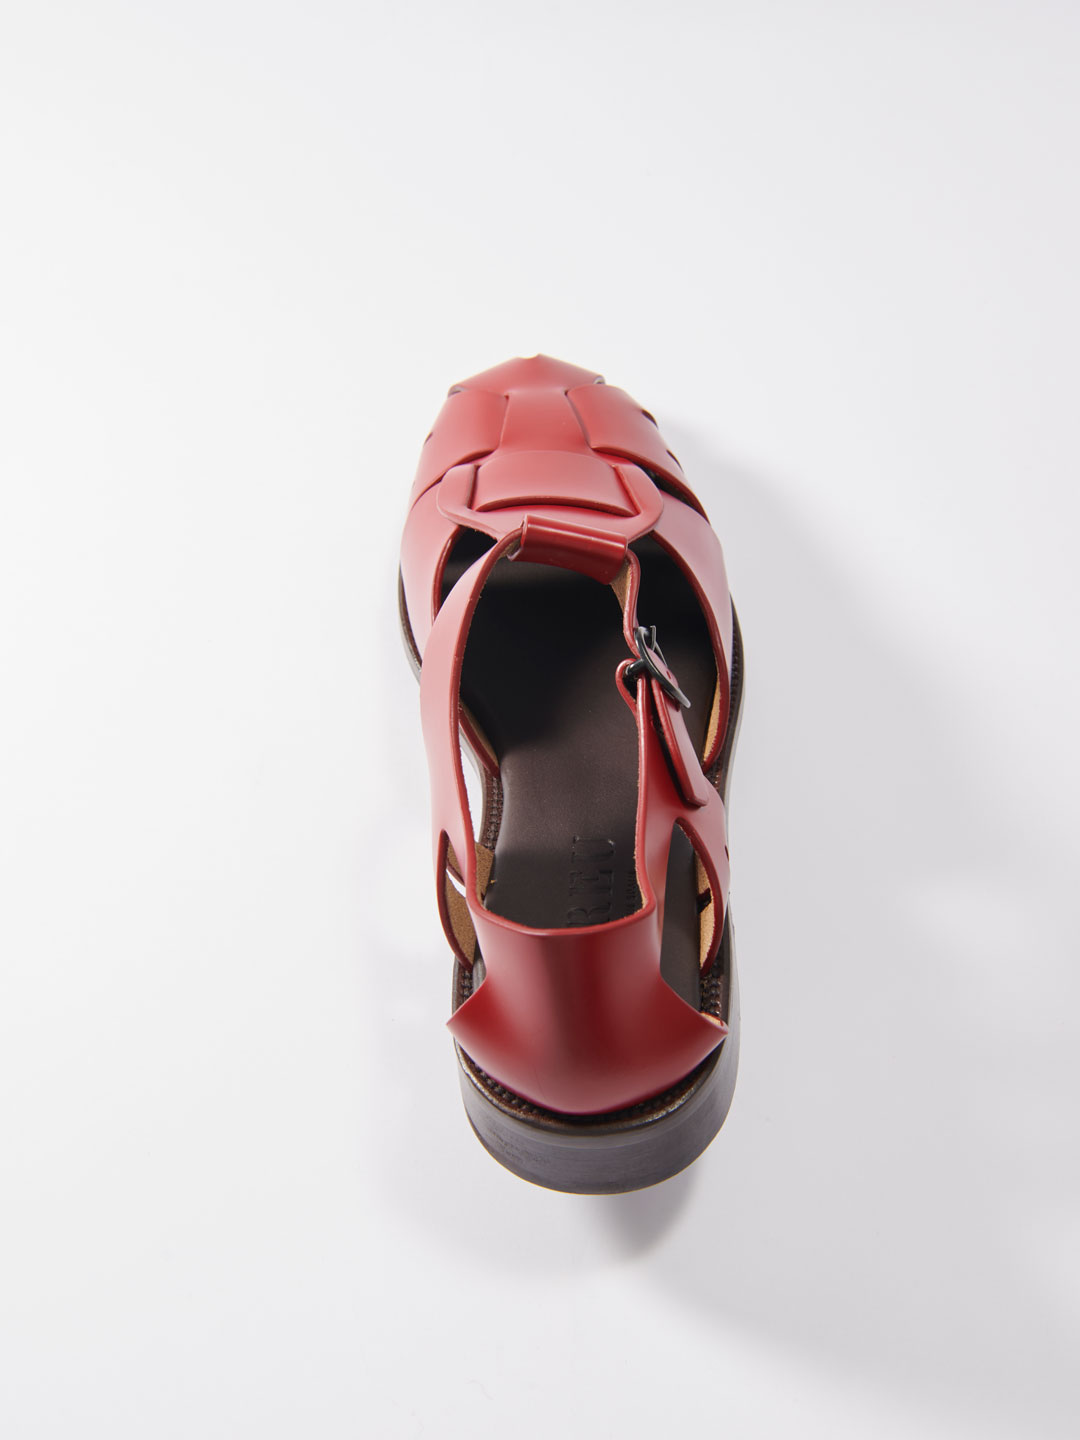 Pesca Fisherman Sandals - Red